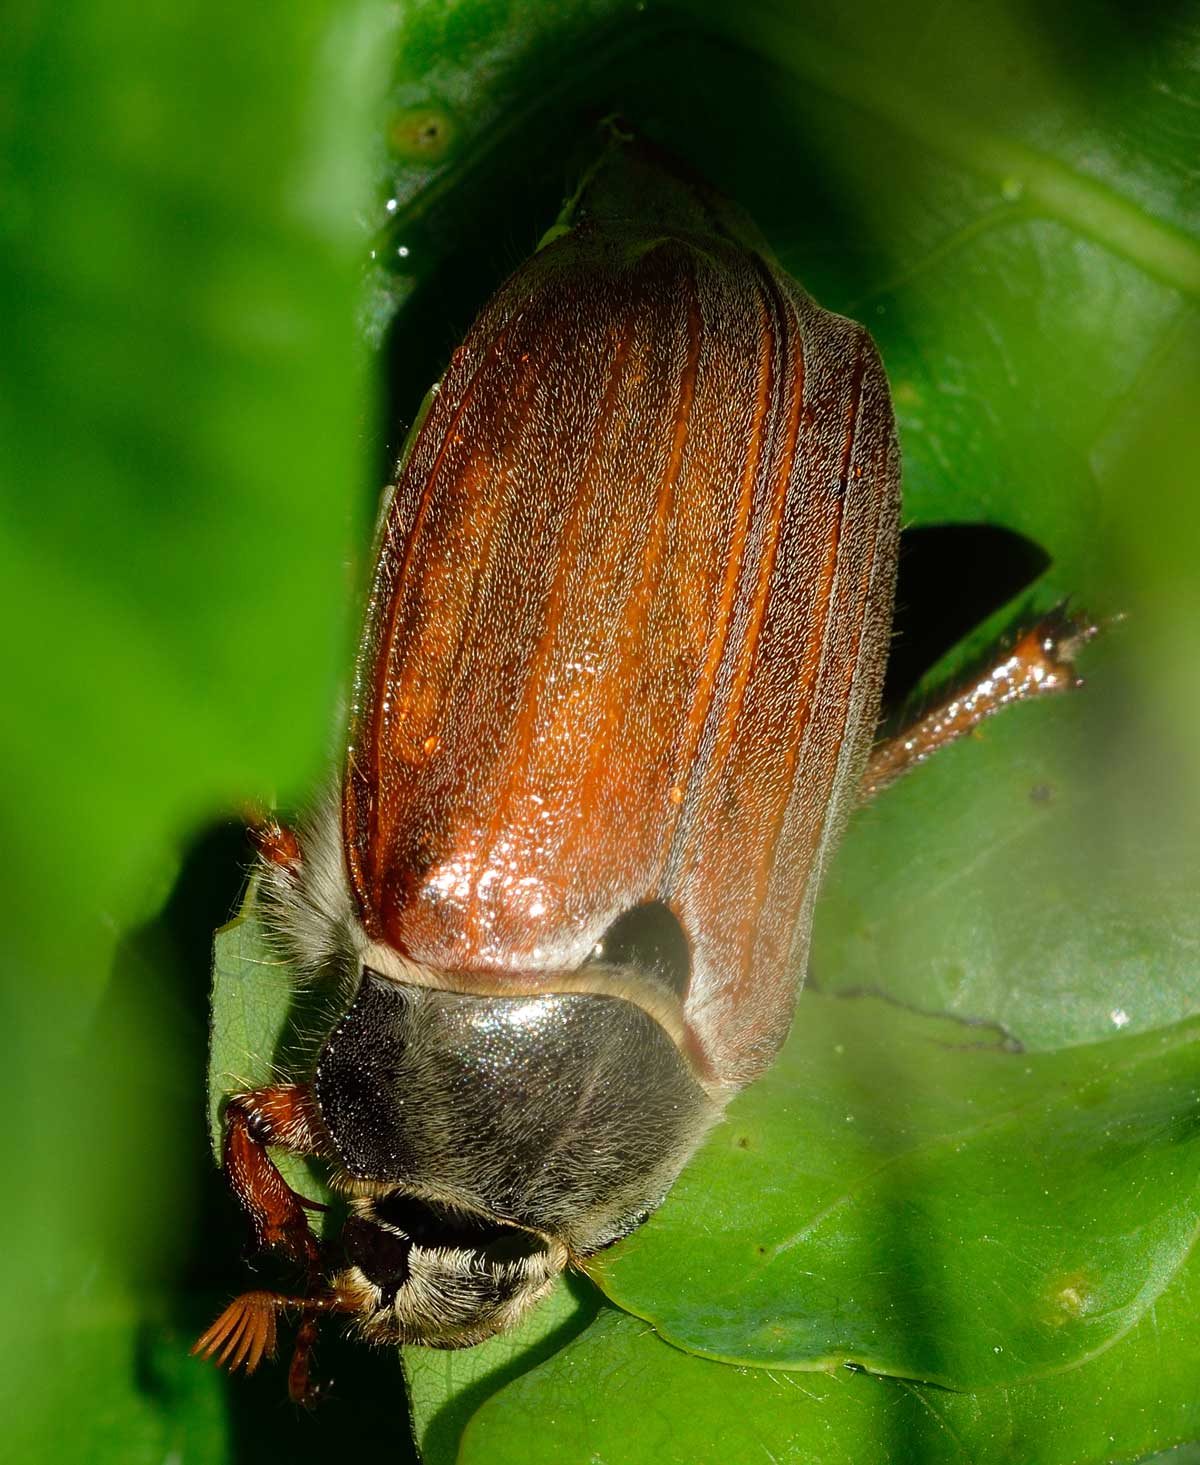 Maggiolino: Melolontha melolontha, Melolonthidae